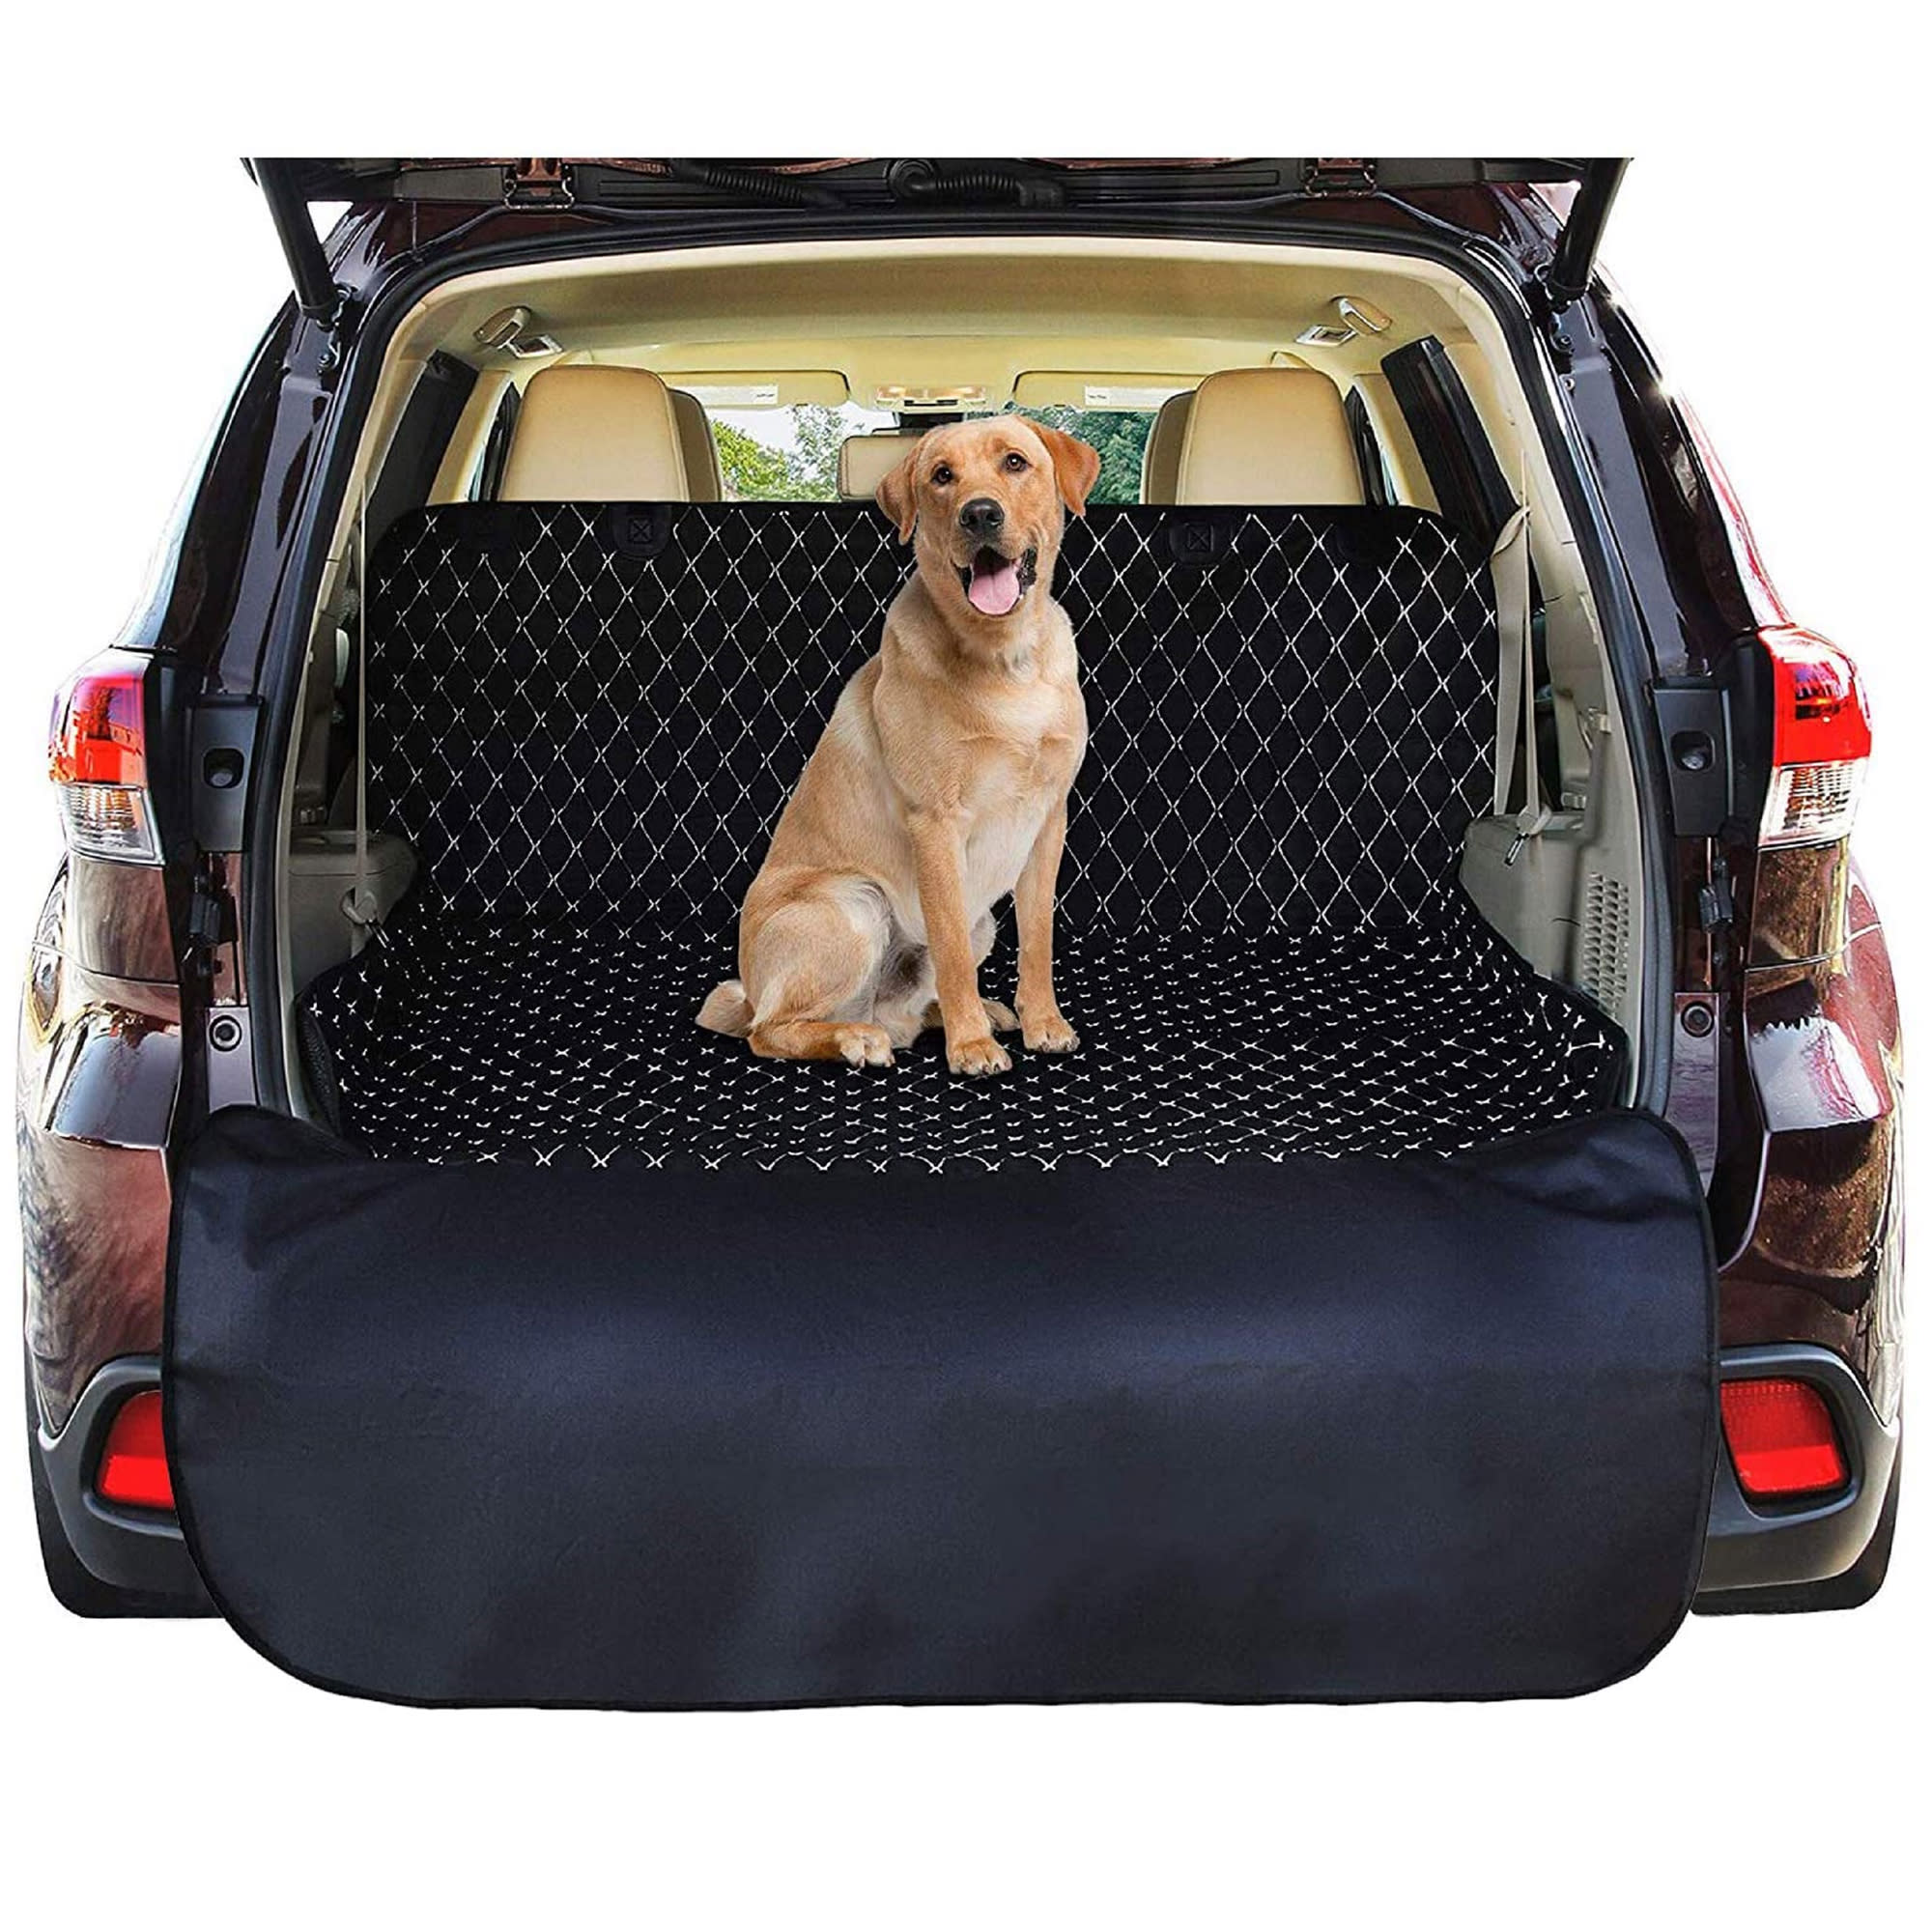 PAWSMARK Black Quilted Pet Cargo Liner Mat Universal Fit for Cars QI003593  - The Home Depot